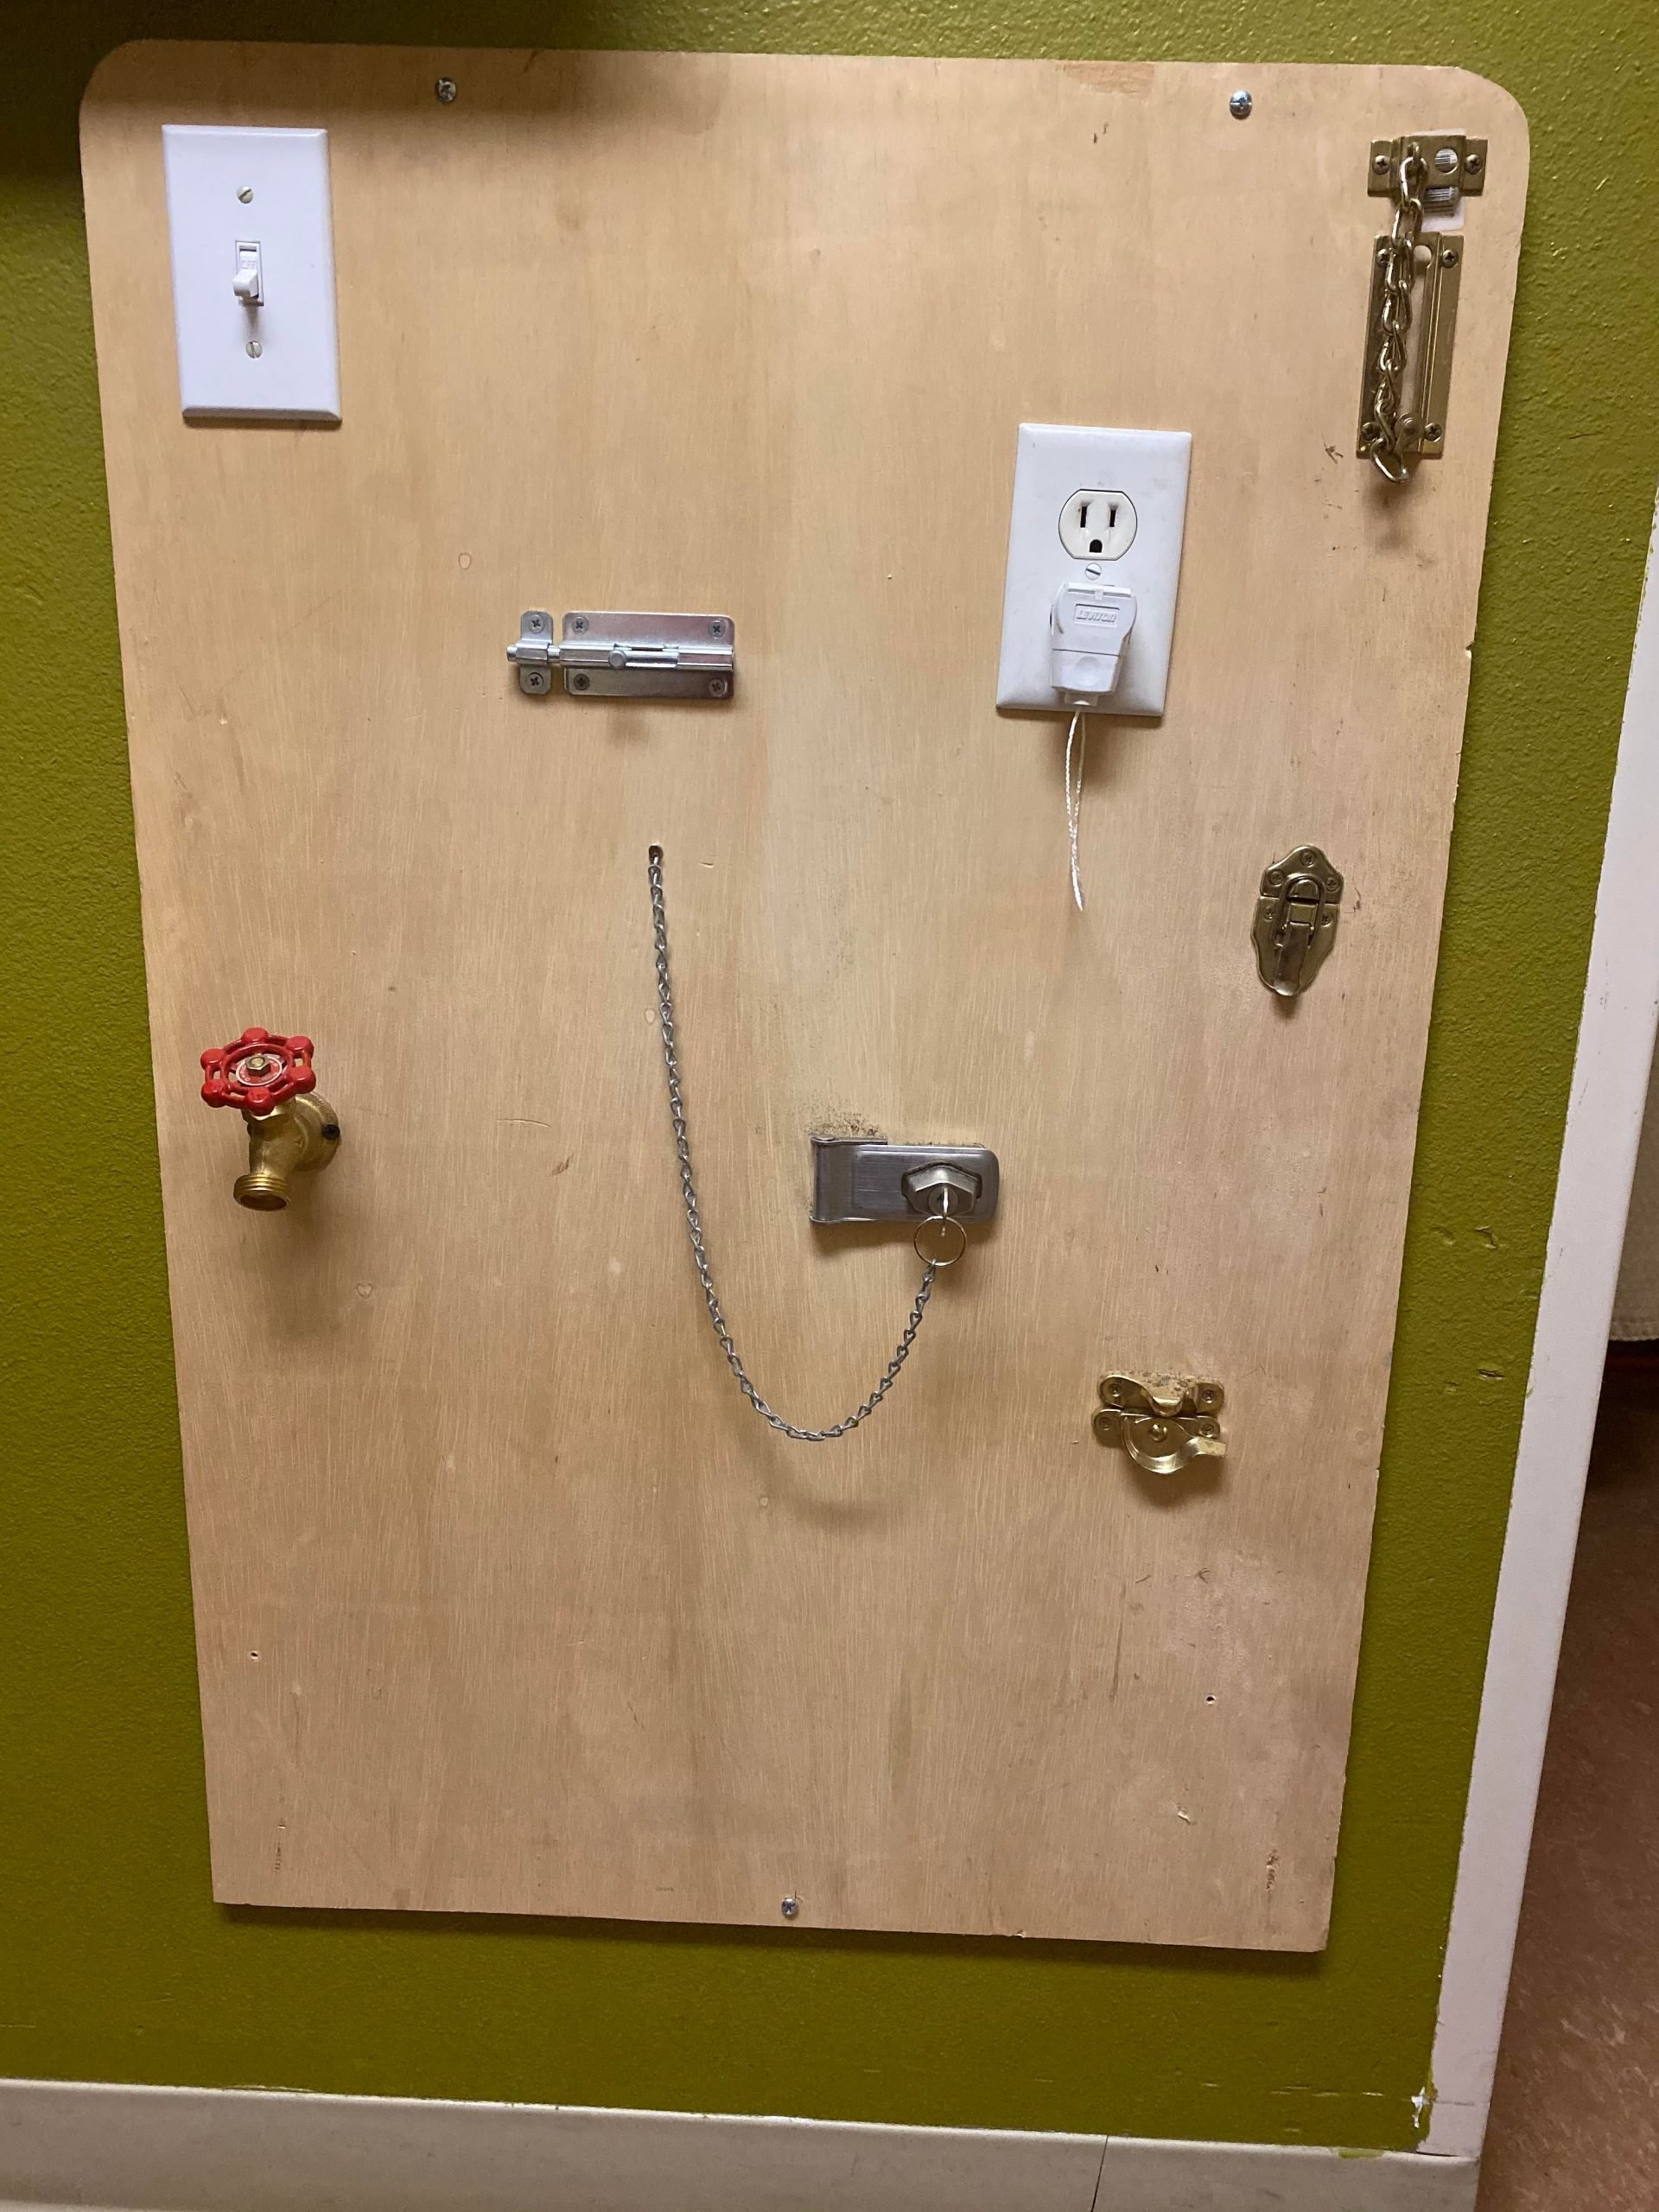 This activity board for a dementia patient : mildlyinteresting